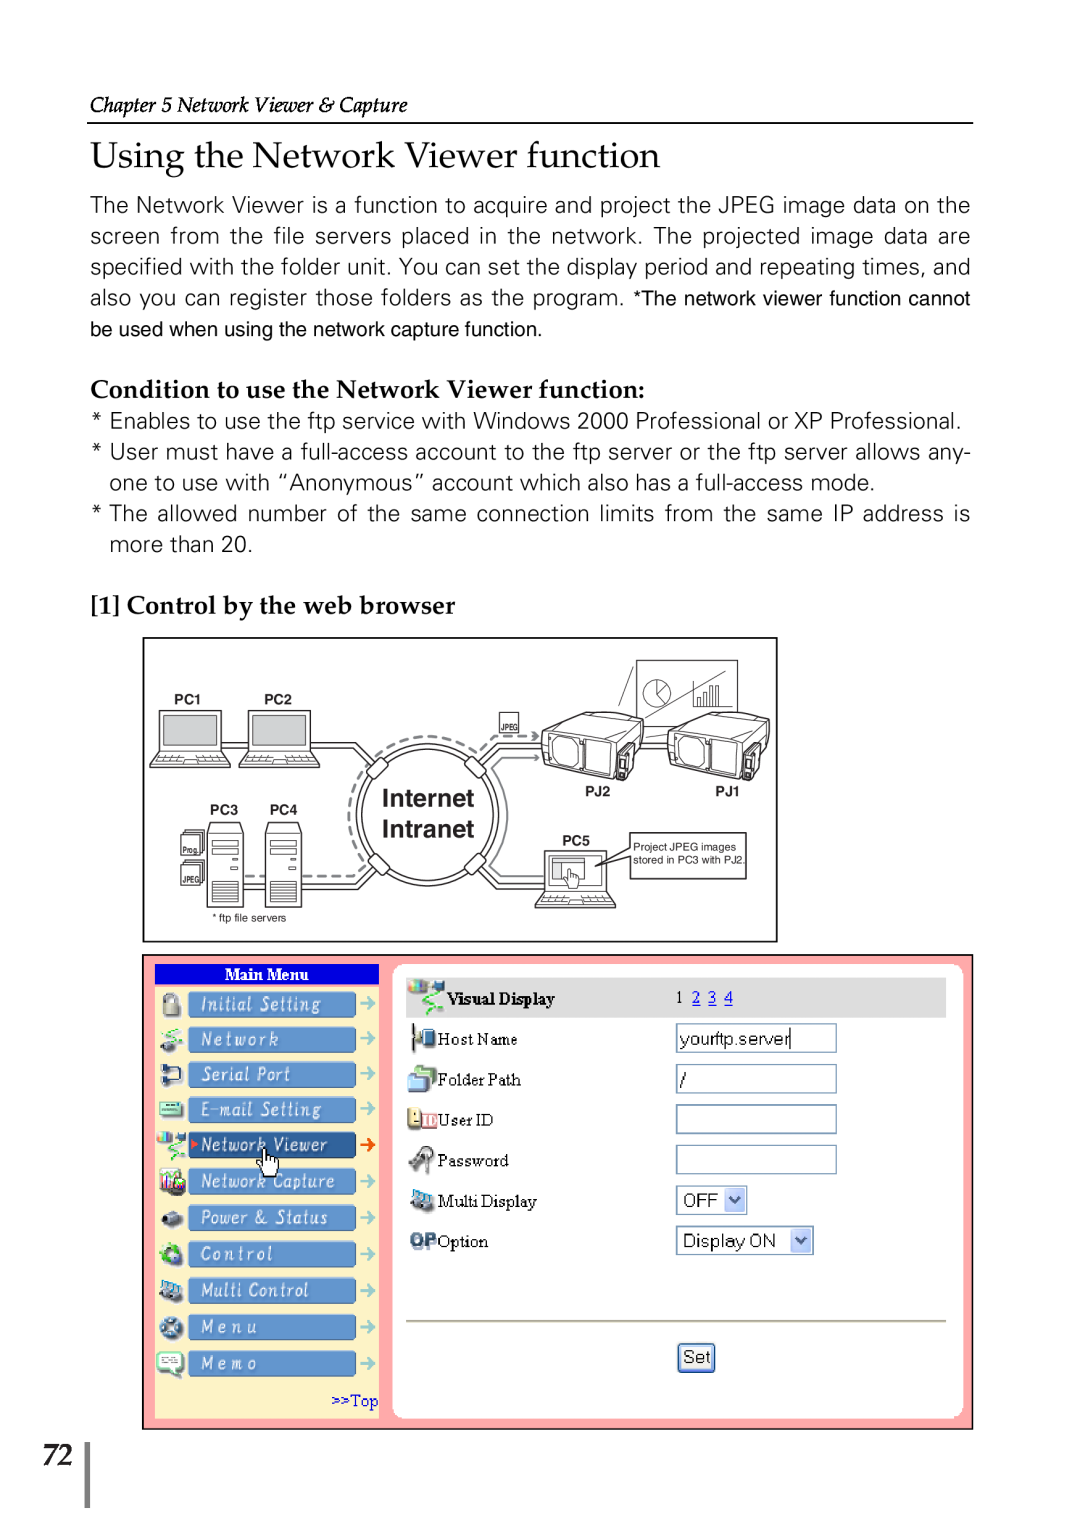 Sanyo POA-PN02 Using the Network Viewer function, Condition to use the Network Viewer function, Control by the web browser 